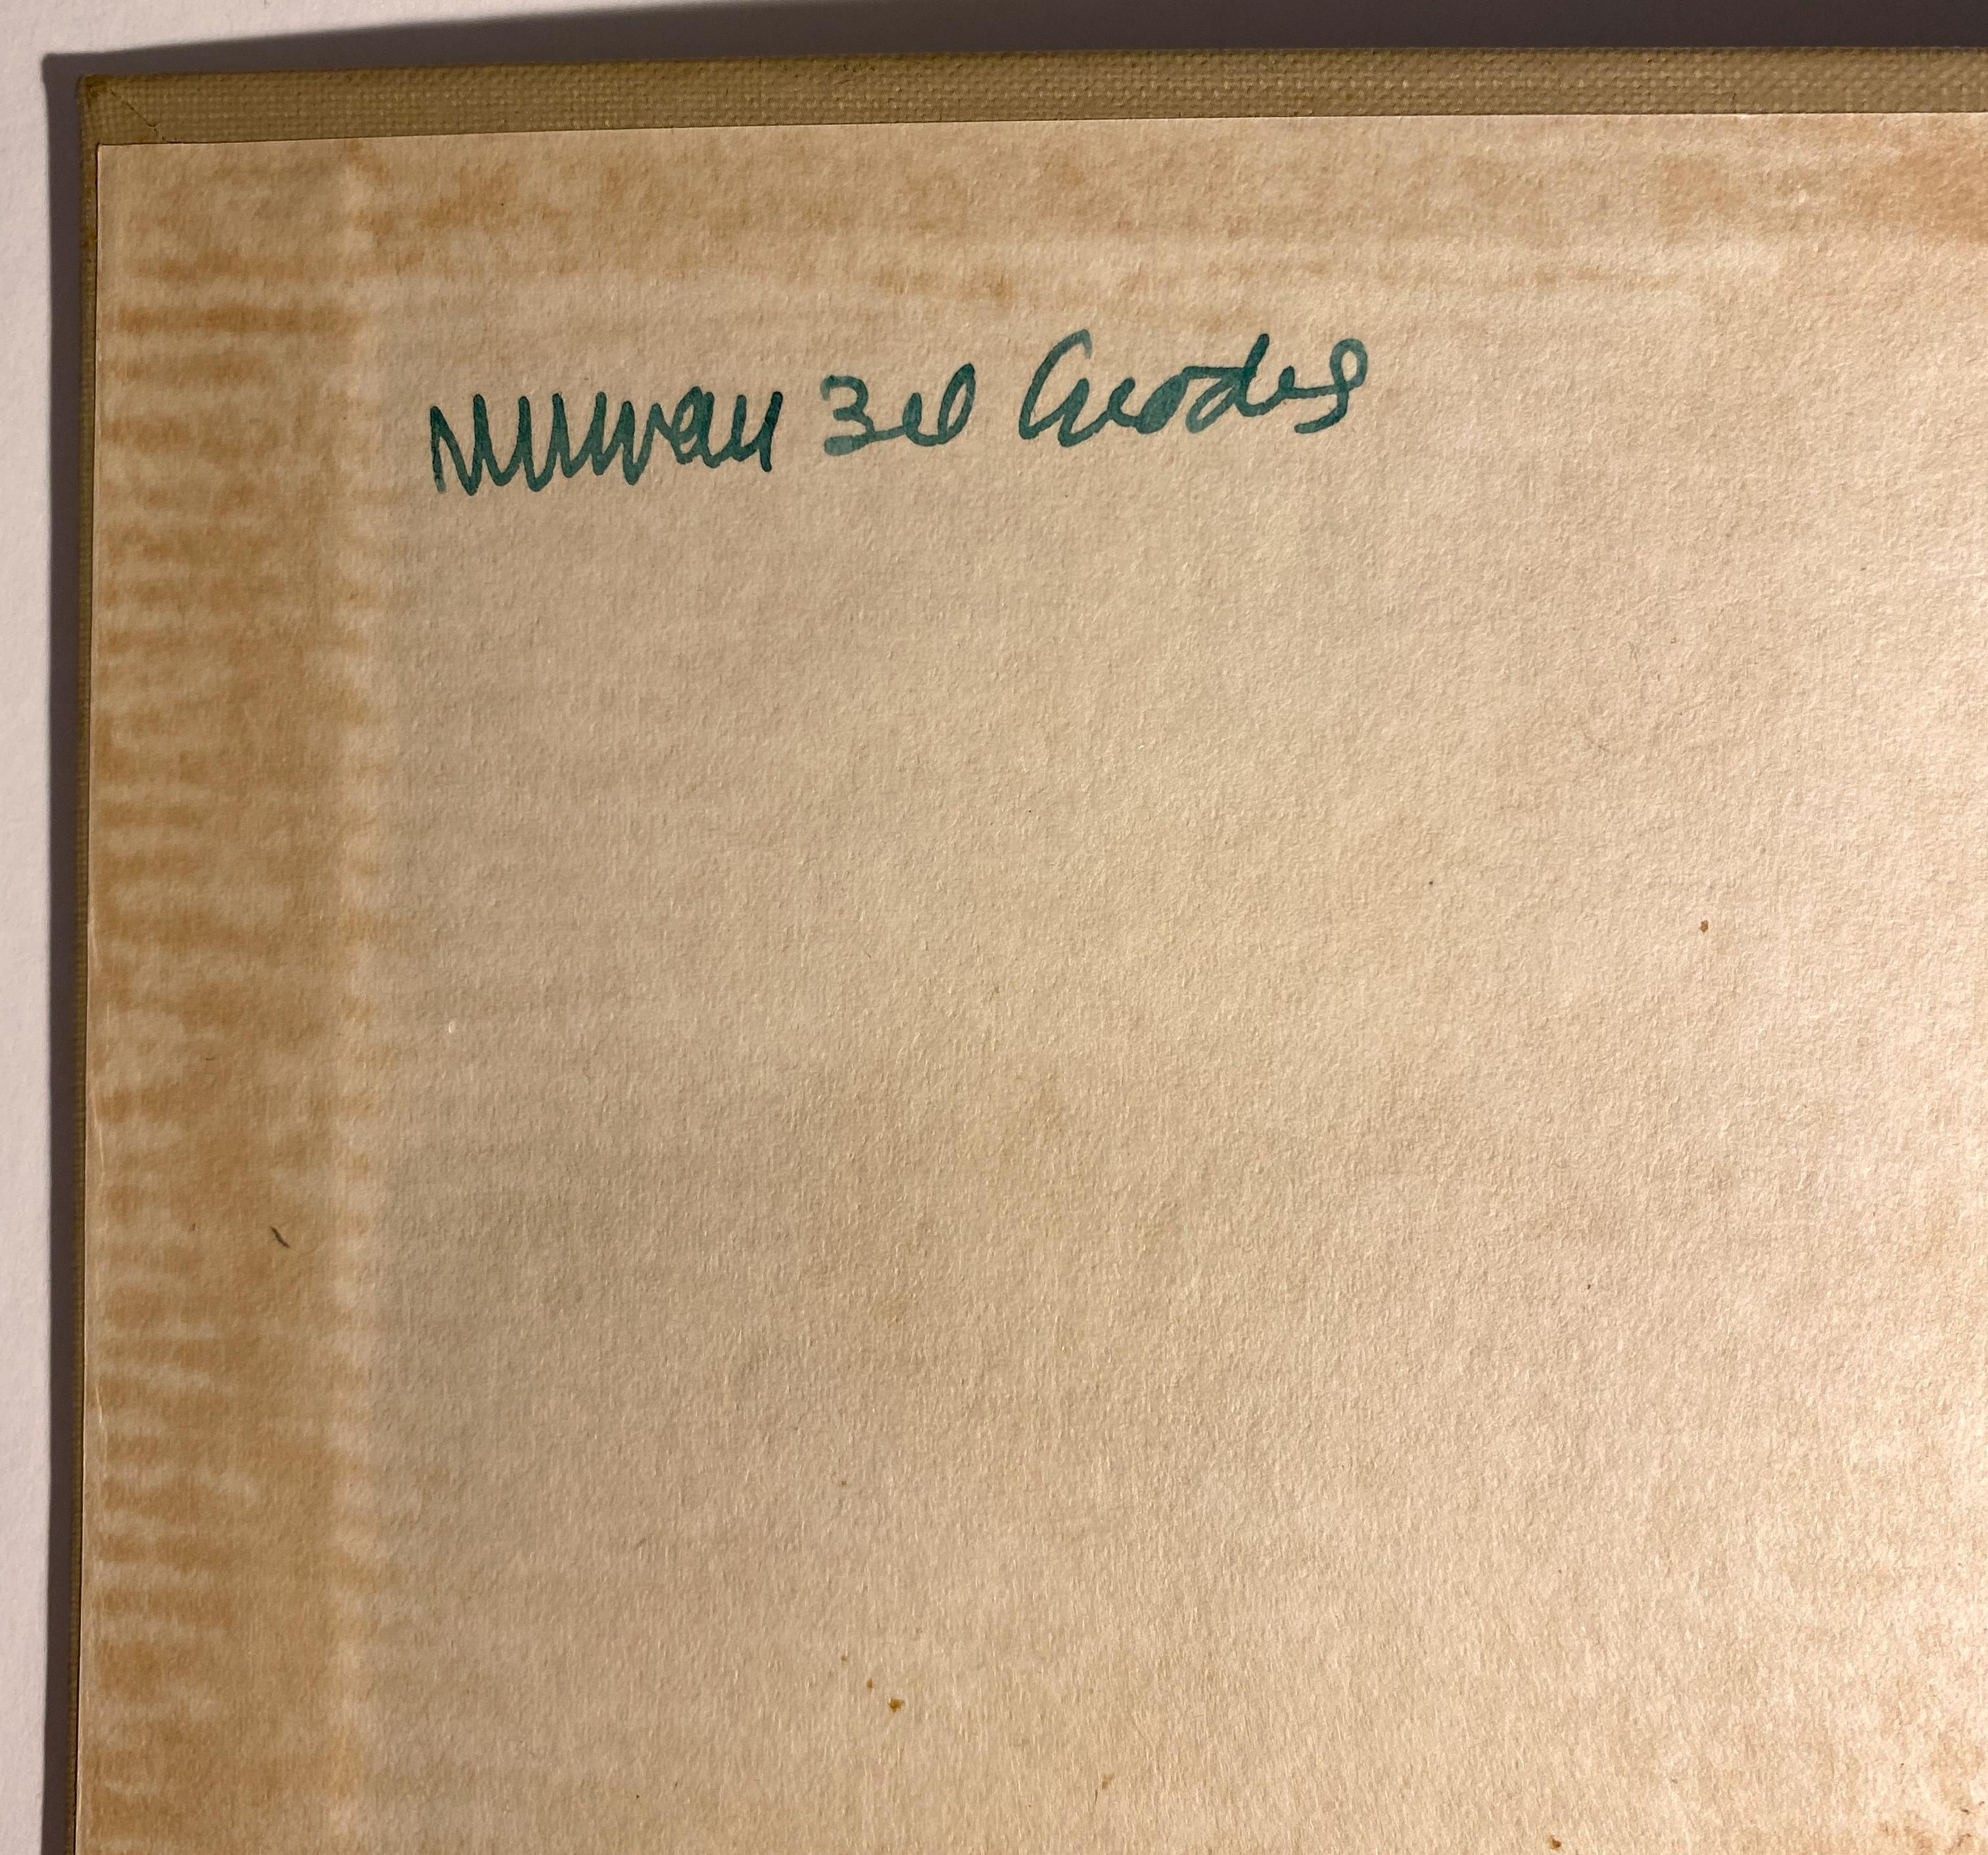 Mid-20th Century Signed Copy of Magic Motorways by Norman Bel Geddes